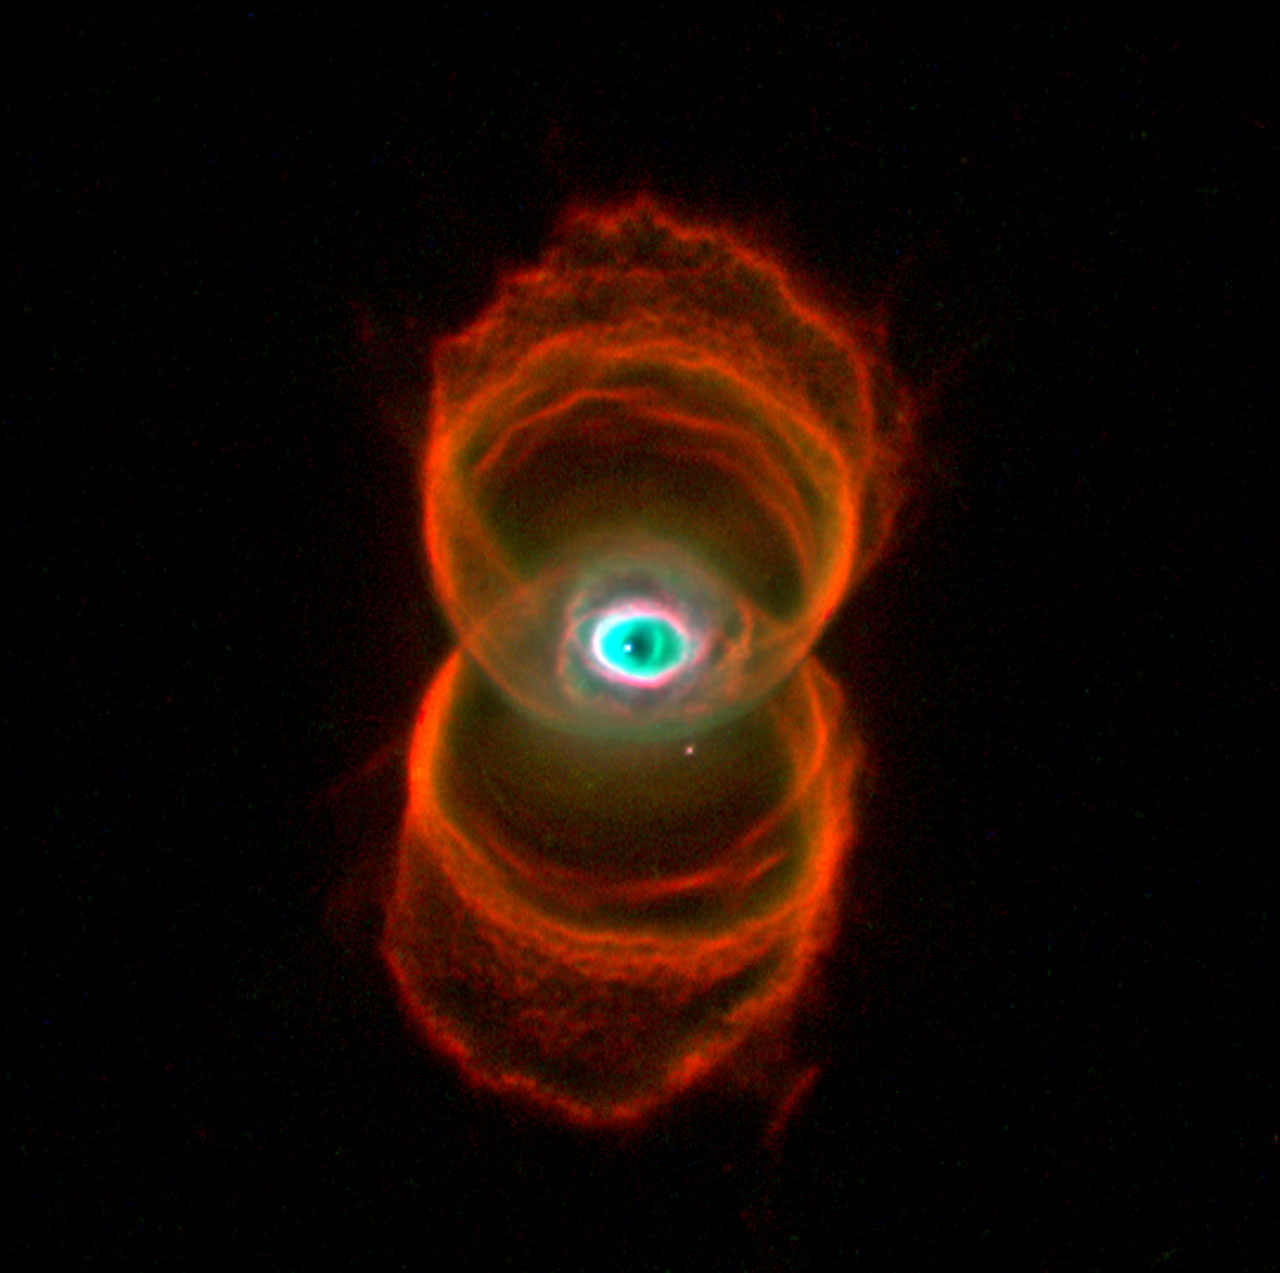 http://www.spacetelescope.org/static/archives/images/screen/opo9607a.jpg